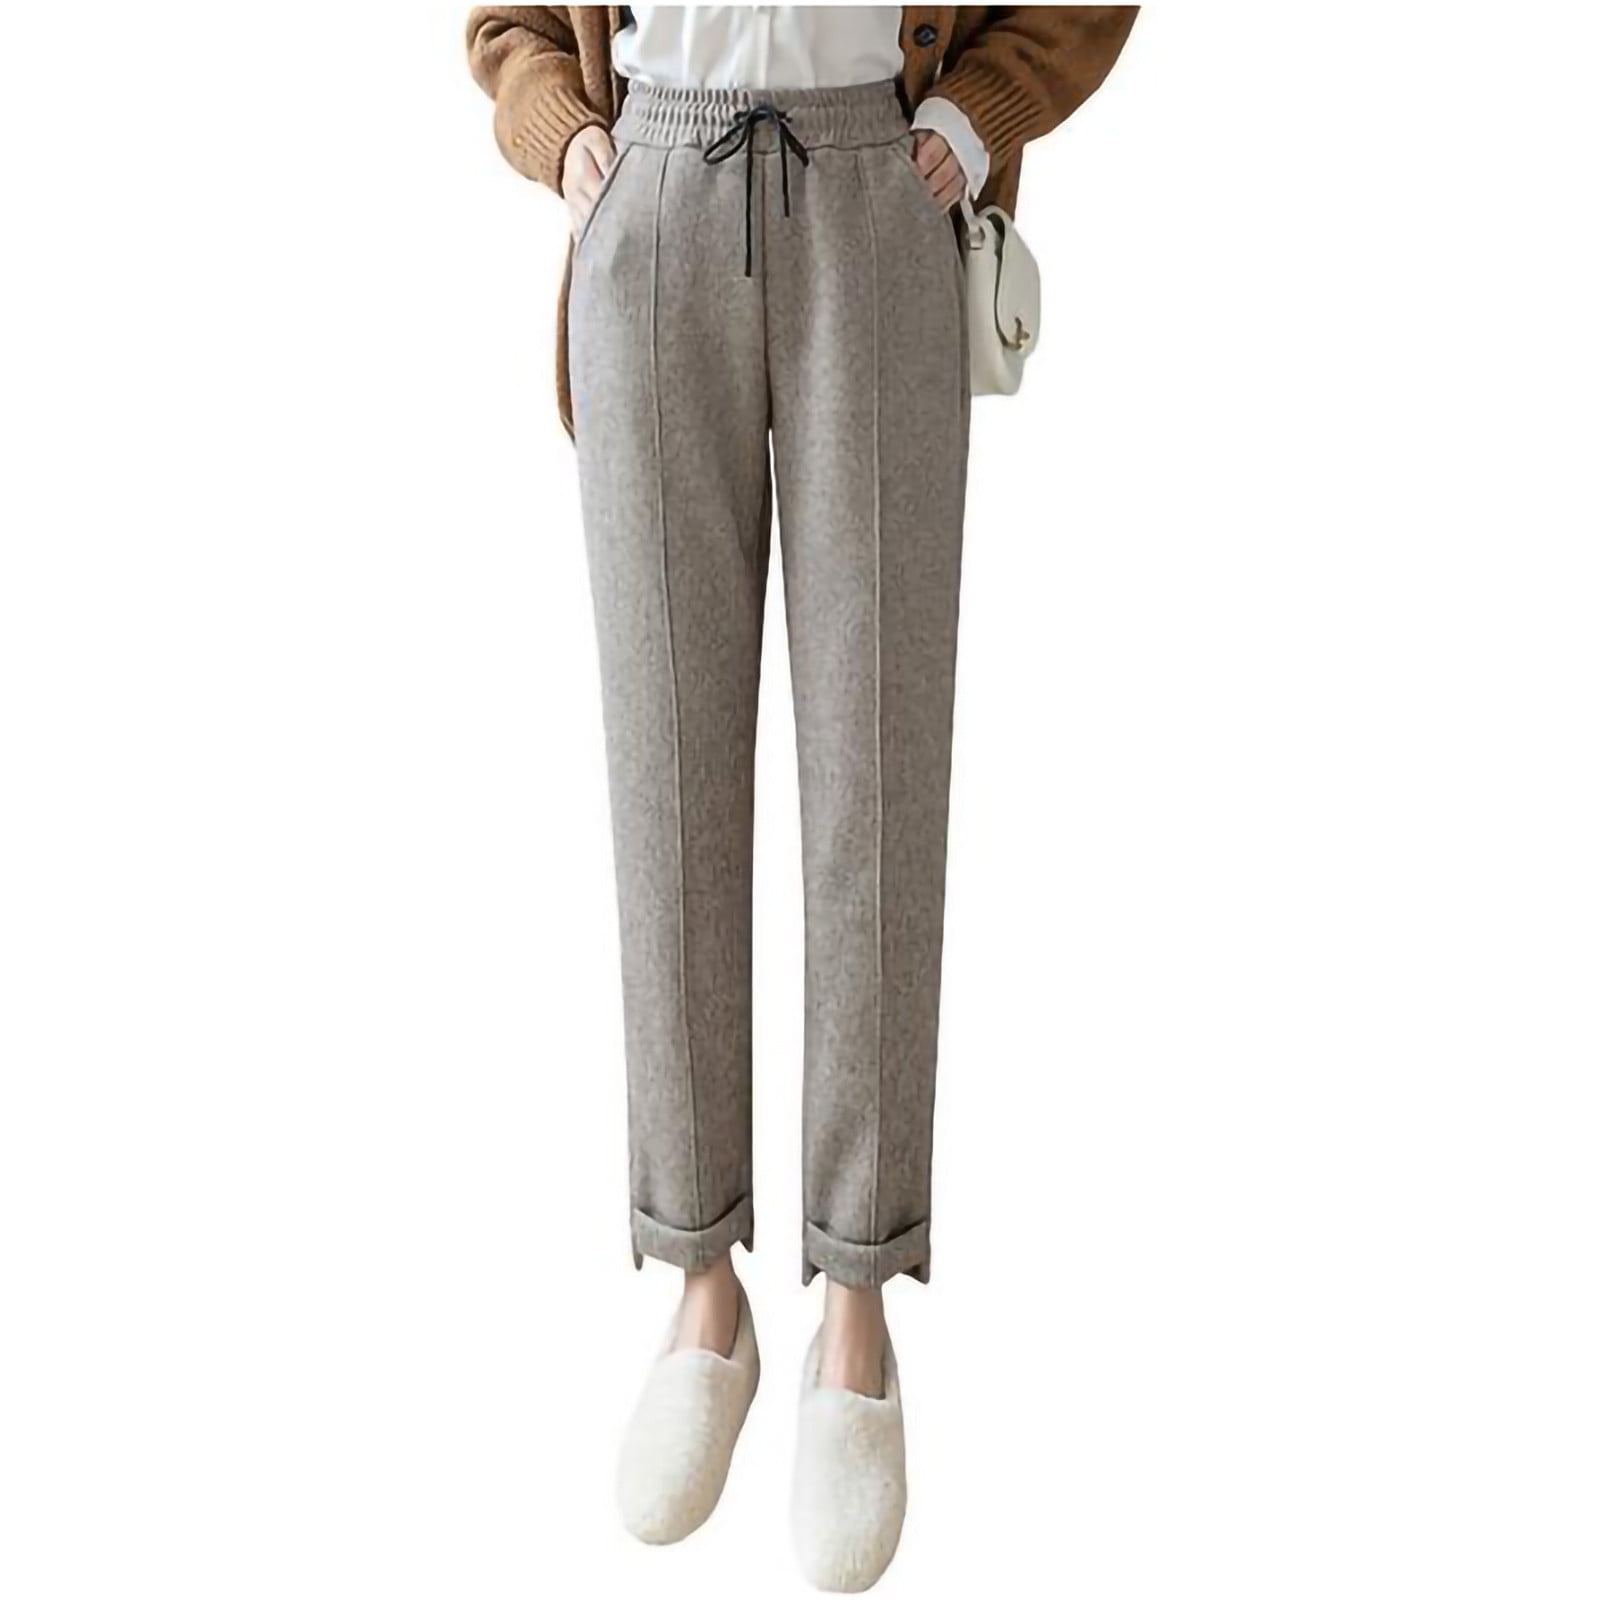 Stay Stylish and Cozy: 3 Must-Have Winter Pants for Women